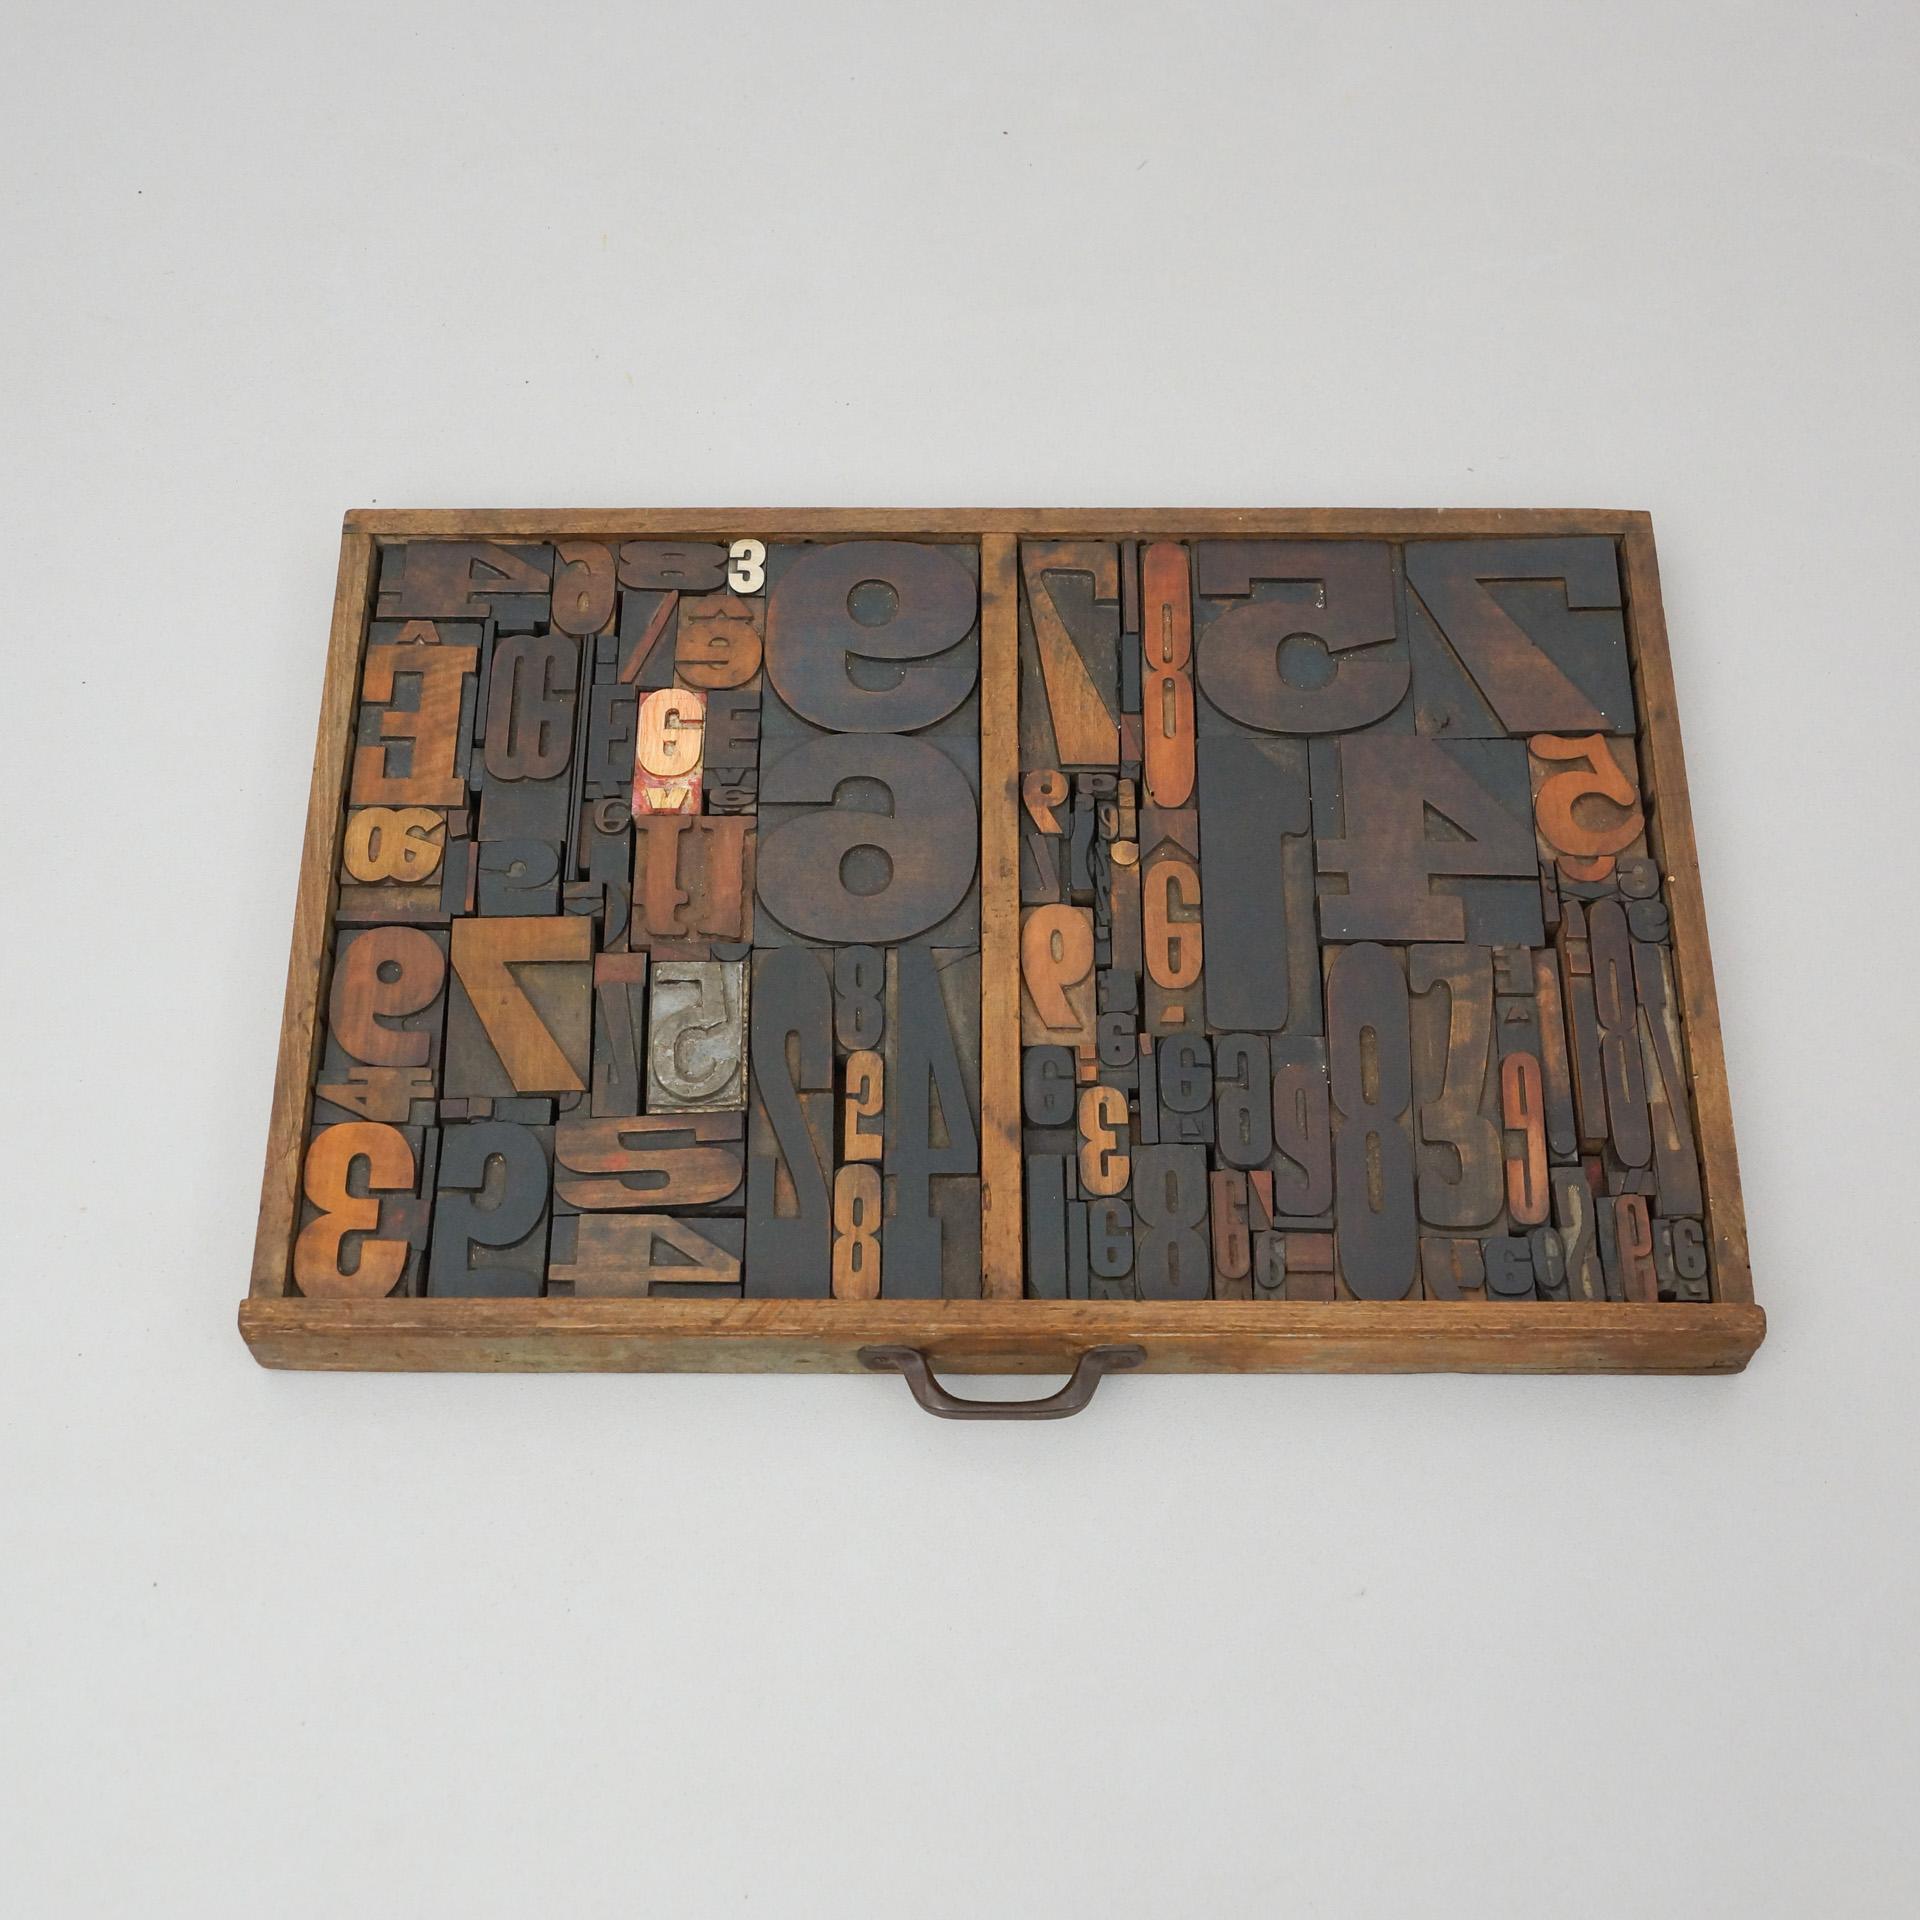 Antique Printing Drawer with Metal Numbering, Spain circa 1950.

In original condition, wear consistent with age and use, preserving a beautiful patina.

Materials:
Wood
Metal

Dimensions:
D 44 cm x W 65 cm x H 5 cm